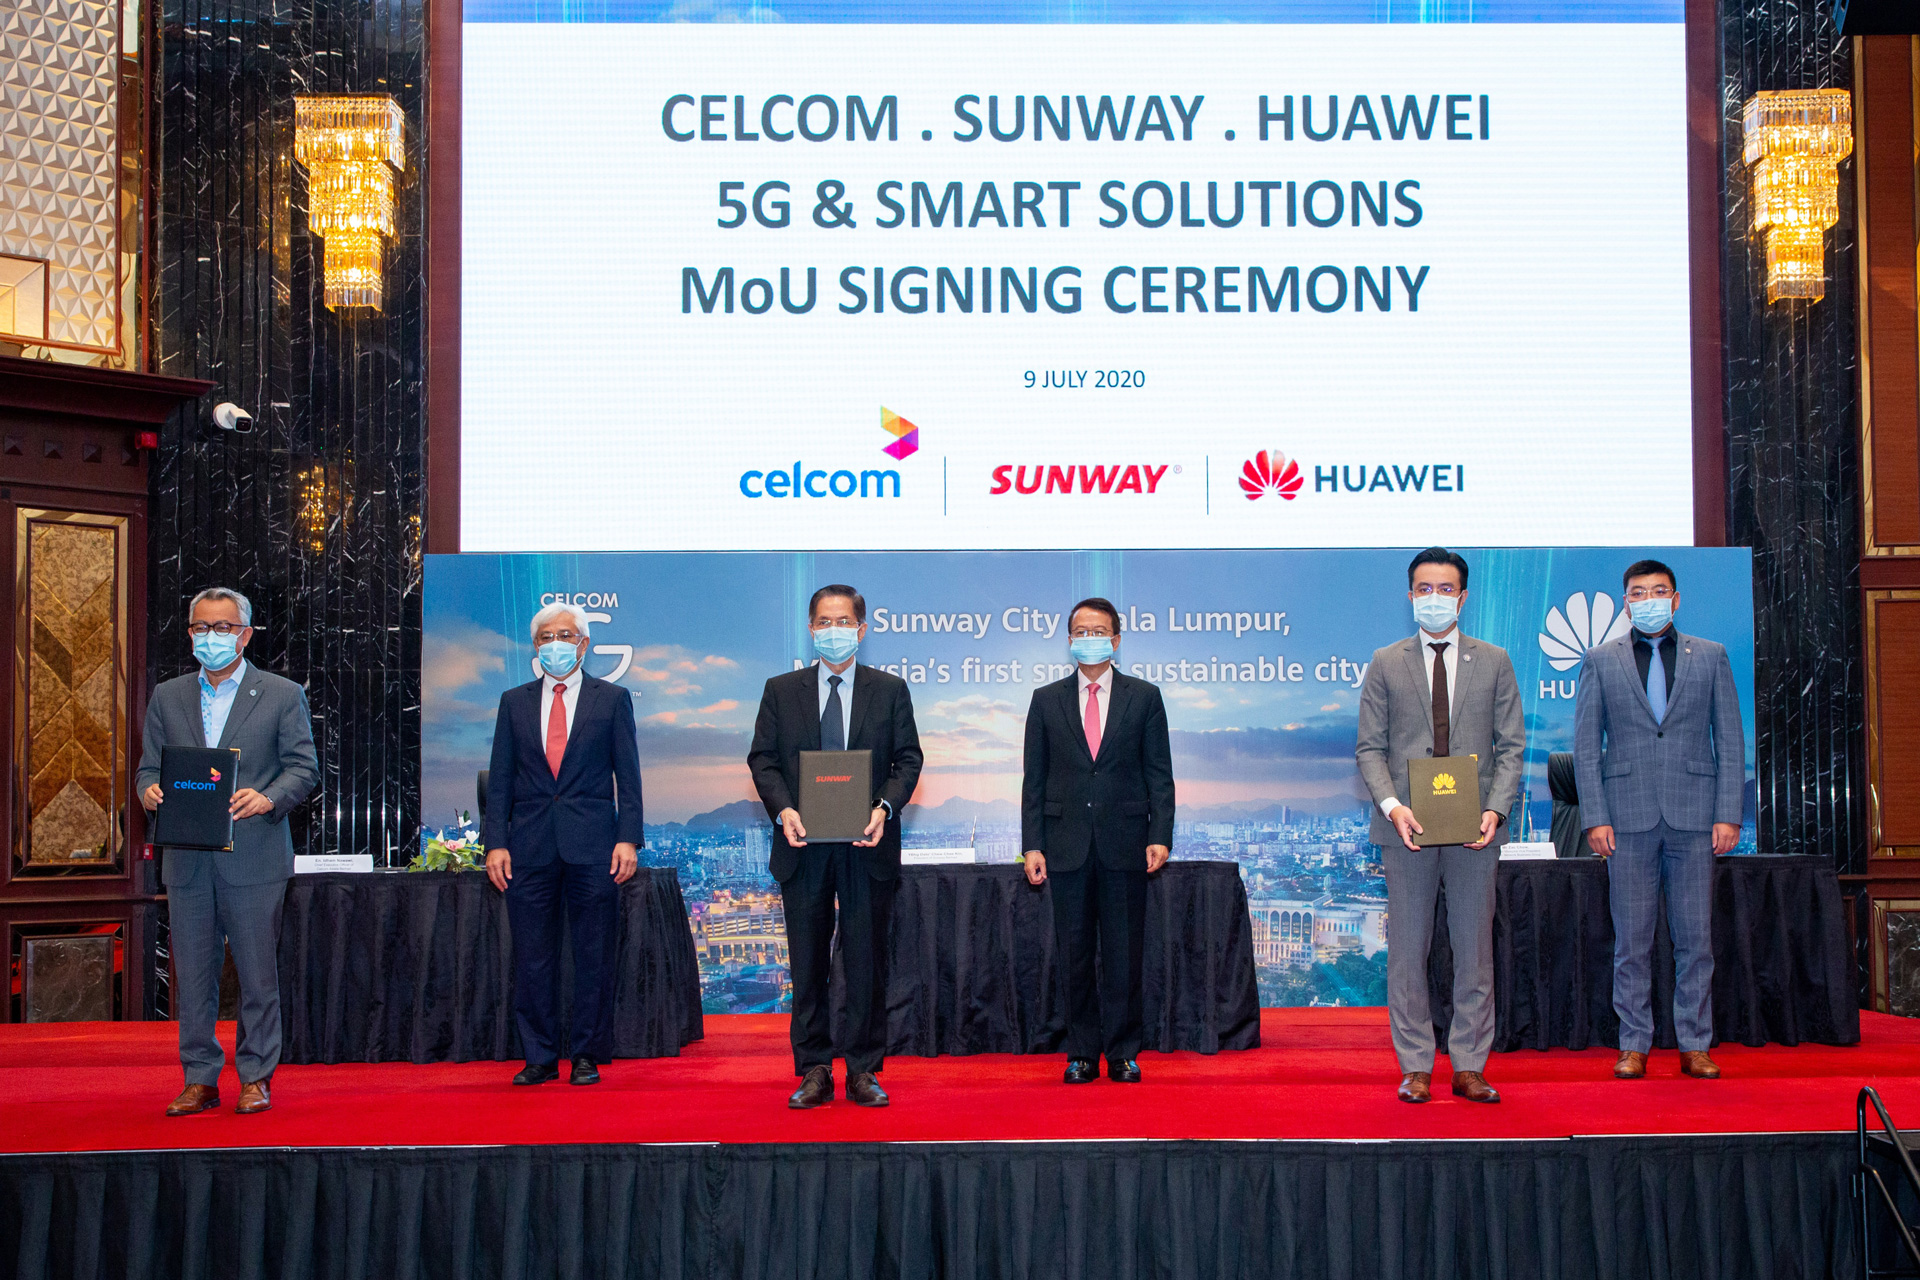 unway, Celcom, and Huawei in Malaysia's First Tripartite Collaboration to Advance 5G and Explore Smart Solutions